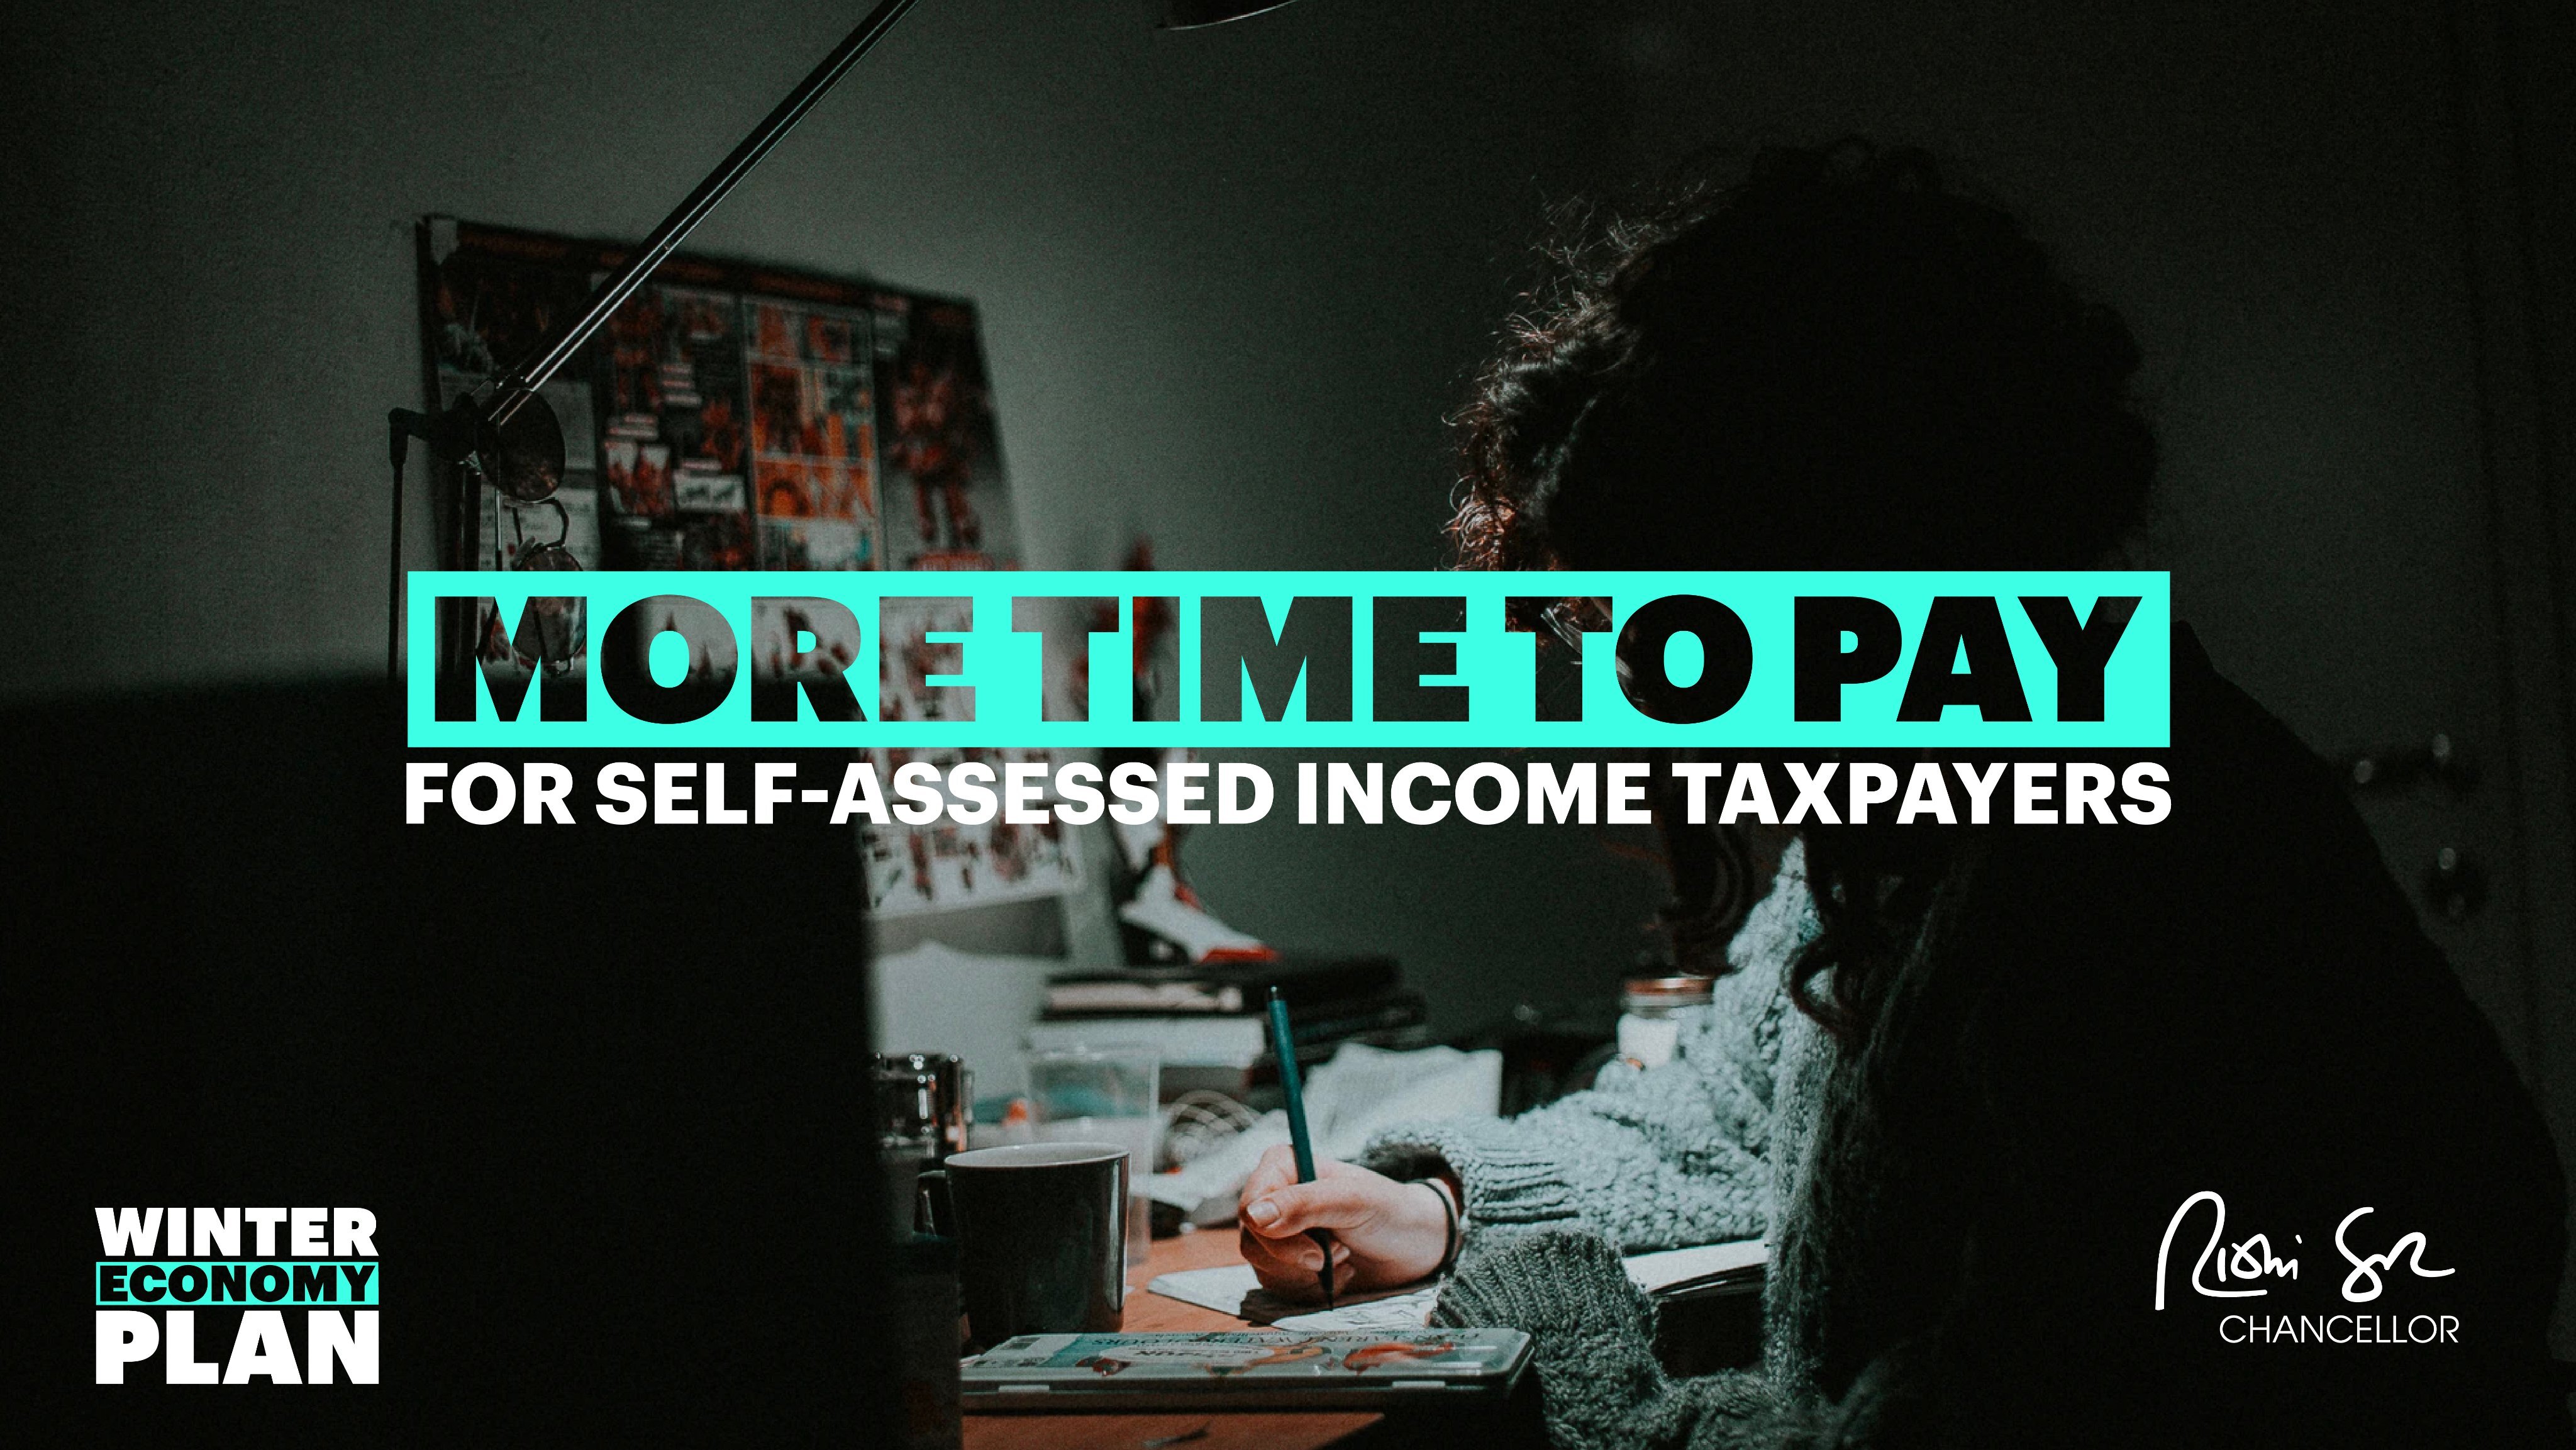 Image to represent Enhanced Time to Pay for Self-Assessment Taxpayers